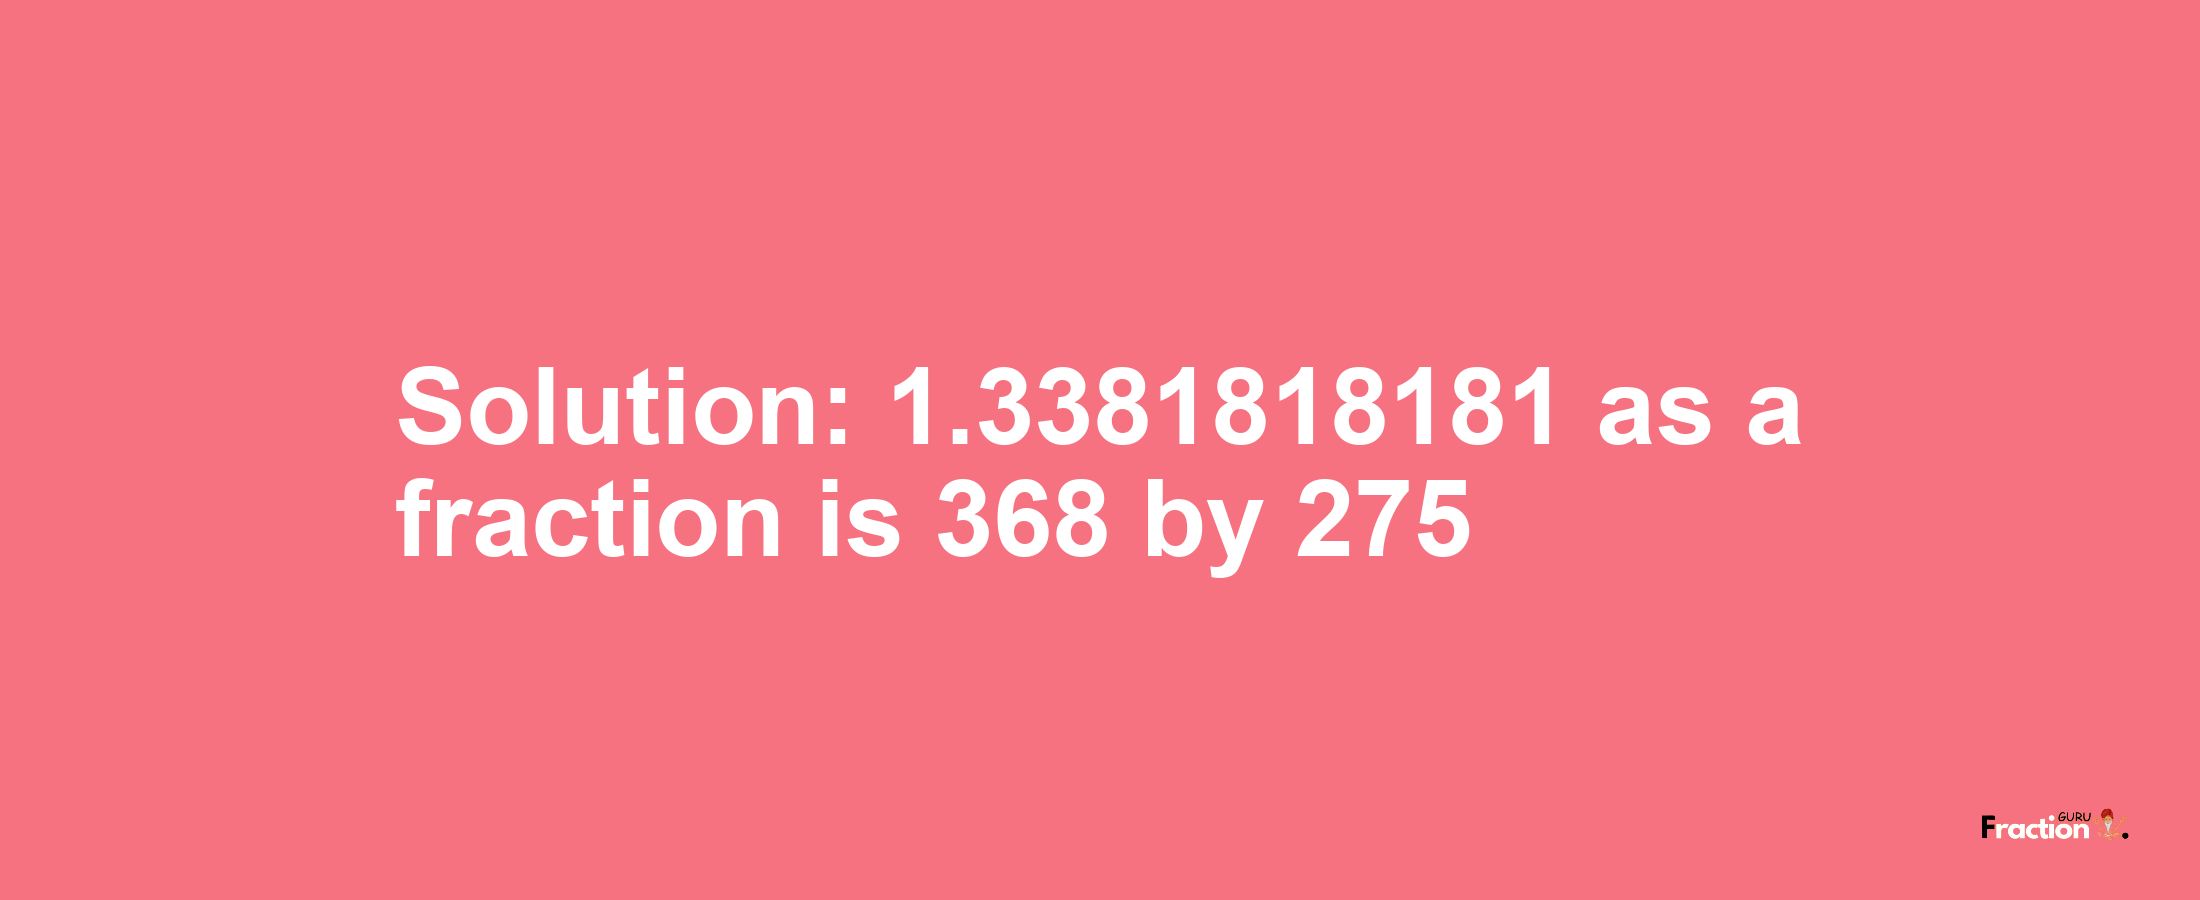 Solution:1.3381818181 as a fraction is 368/275